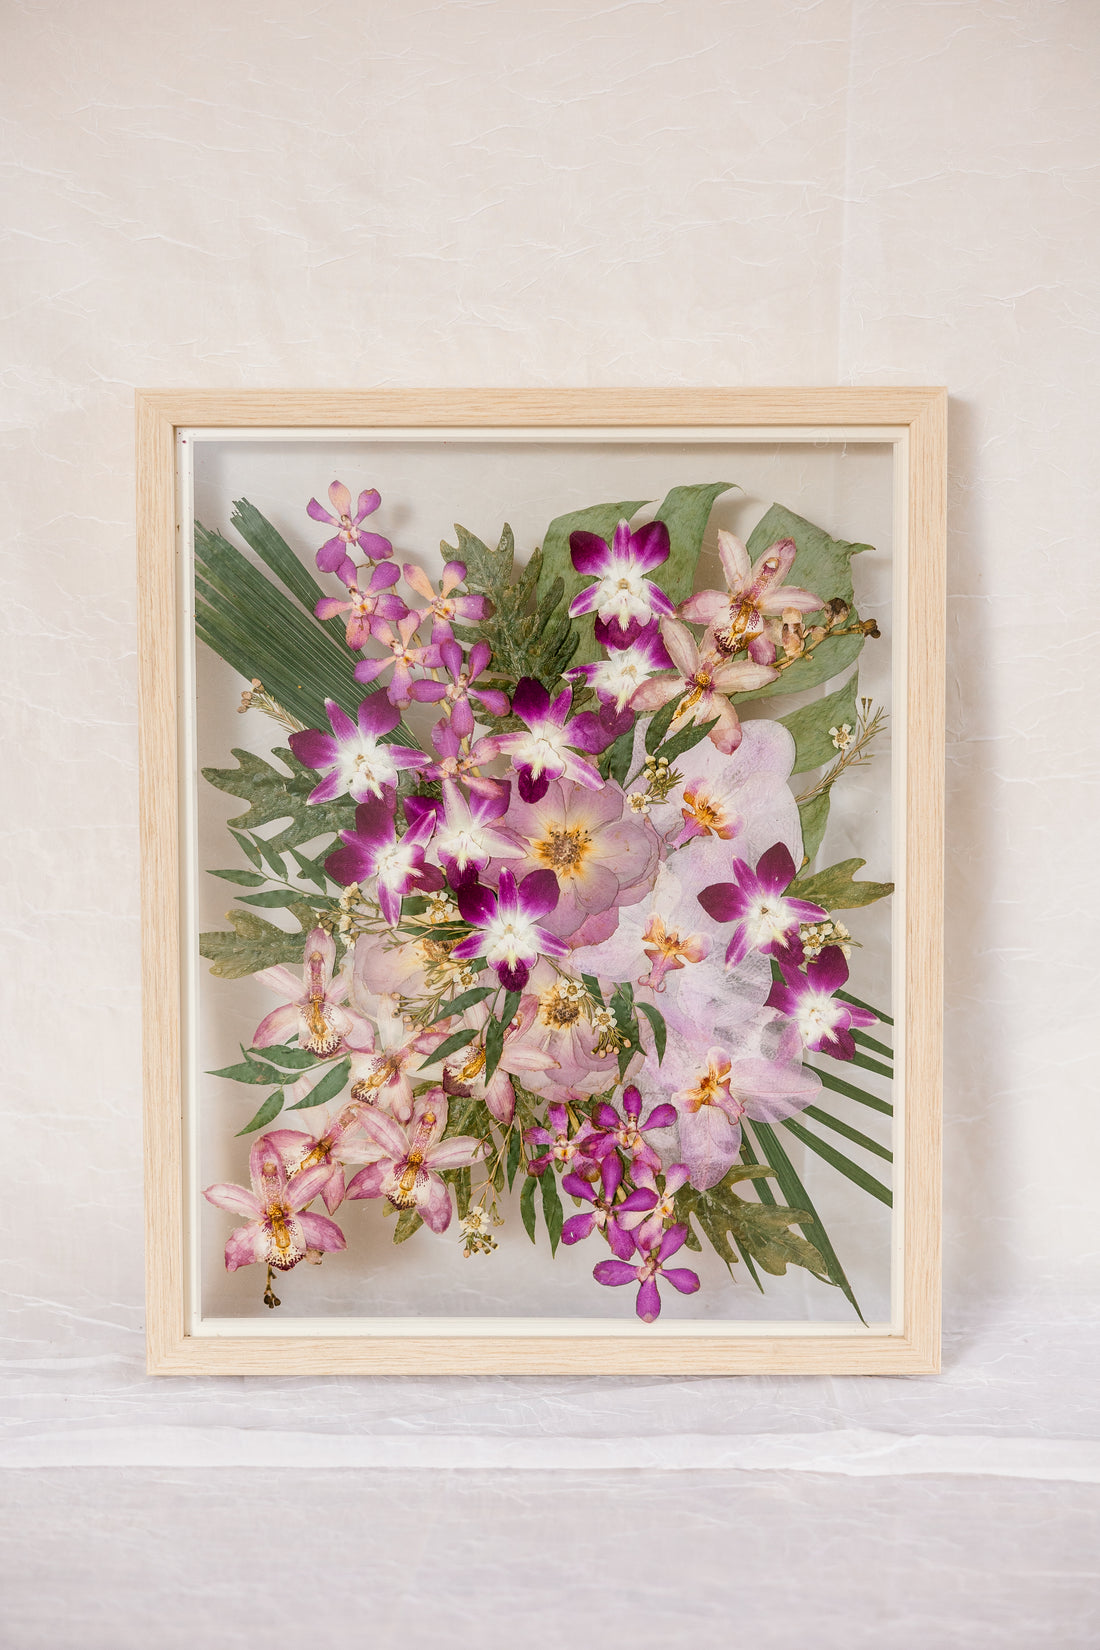 A bright and vibrant pink and green bouquet made up of orchids and roses has been pressed and framed in a natural wood bouquet preservation frame.